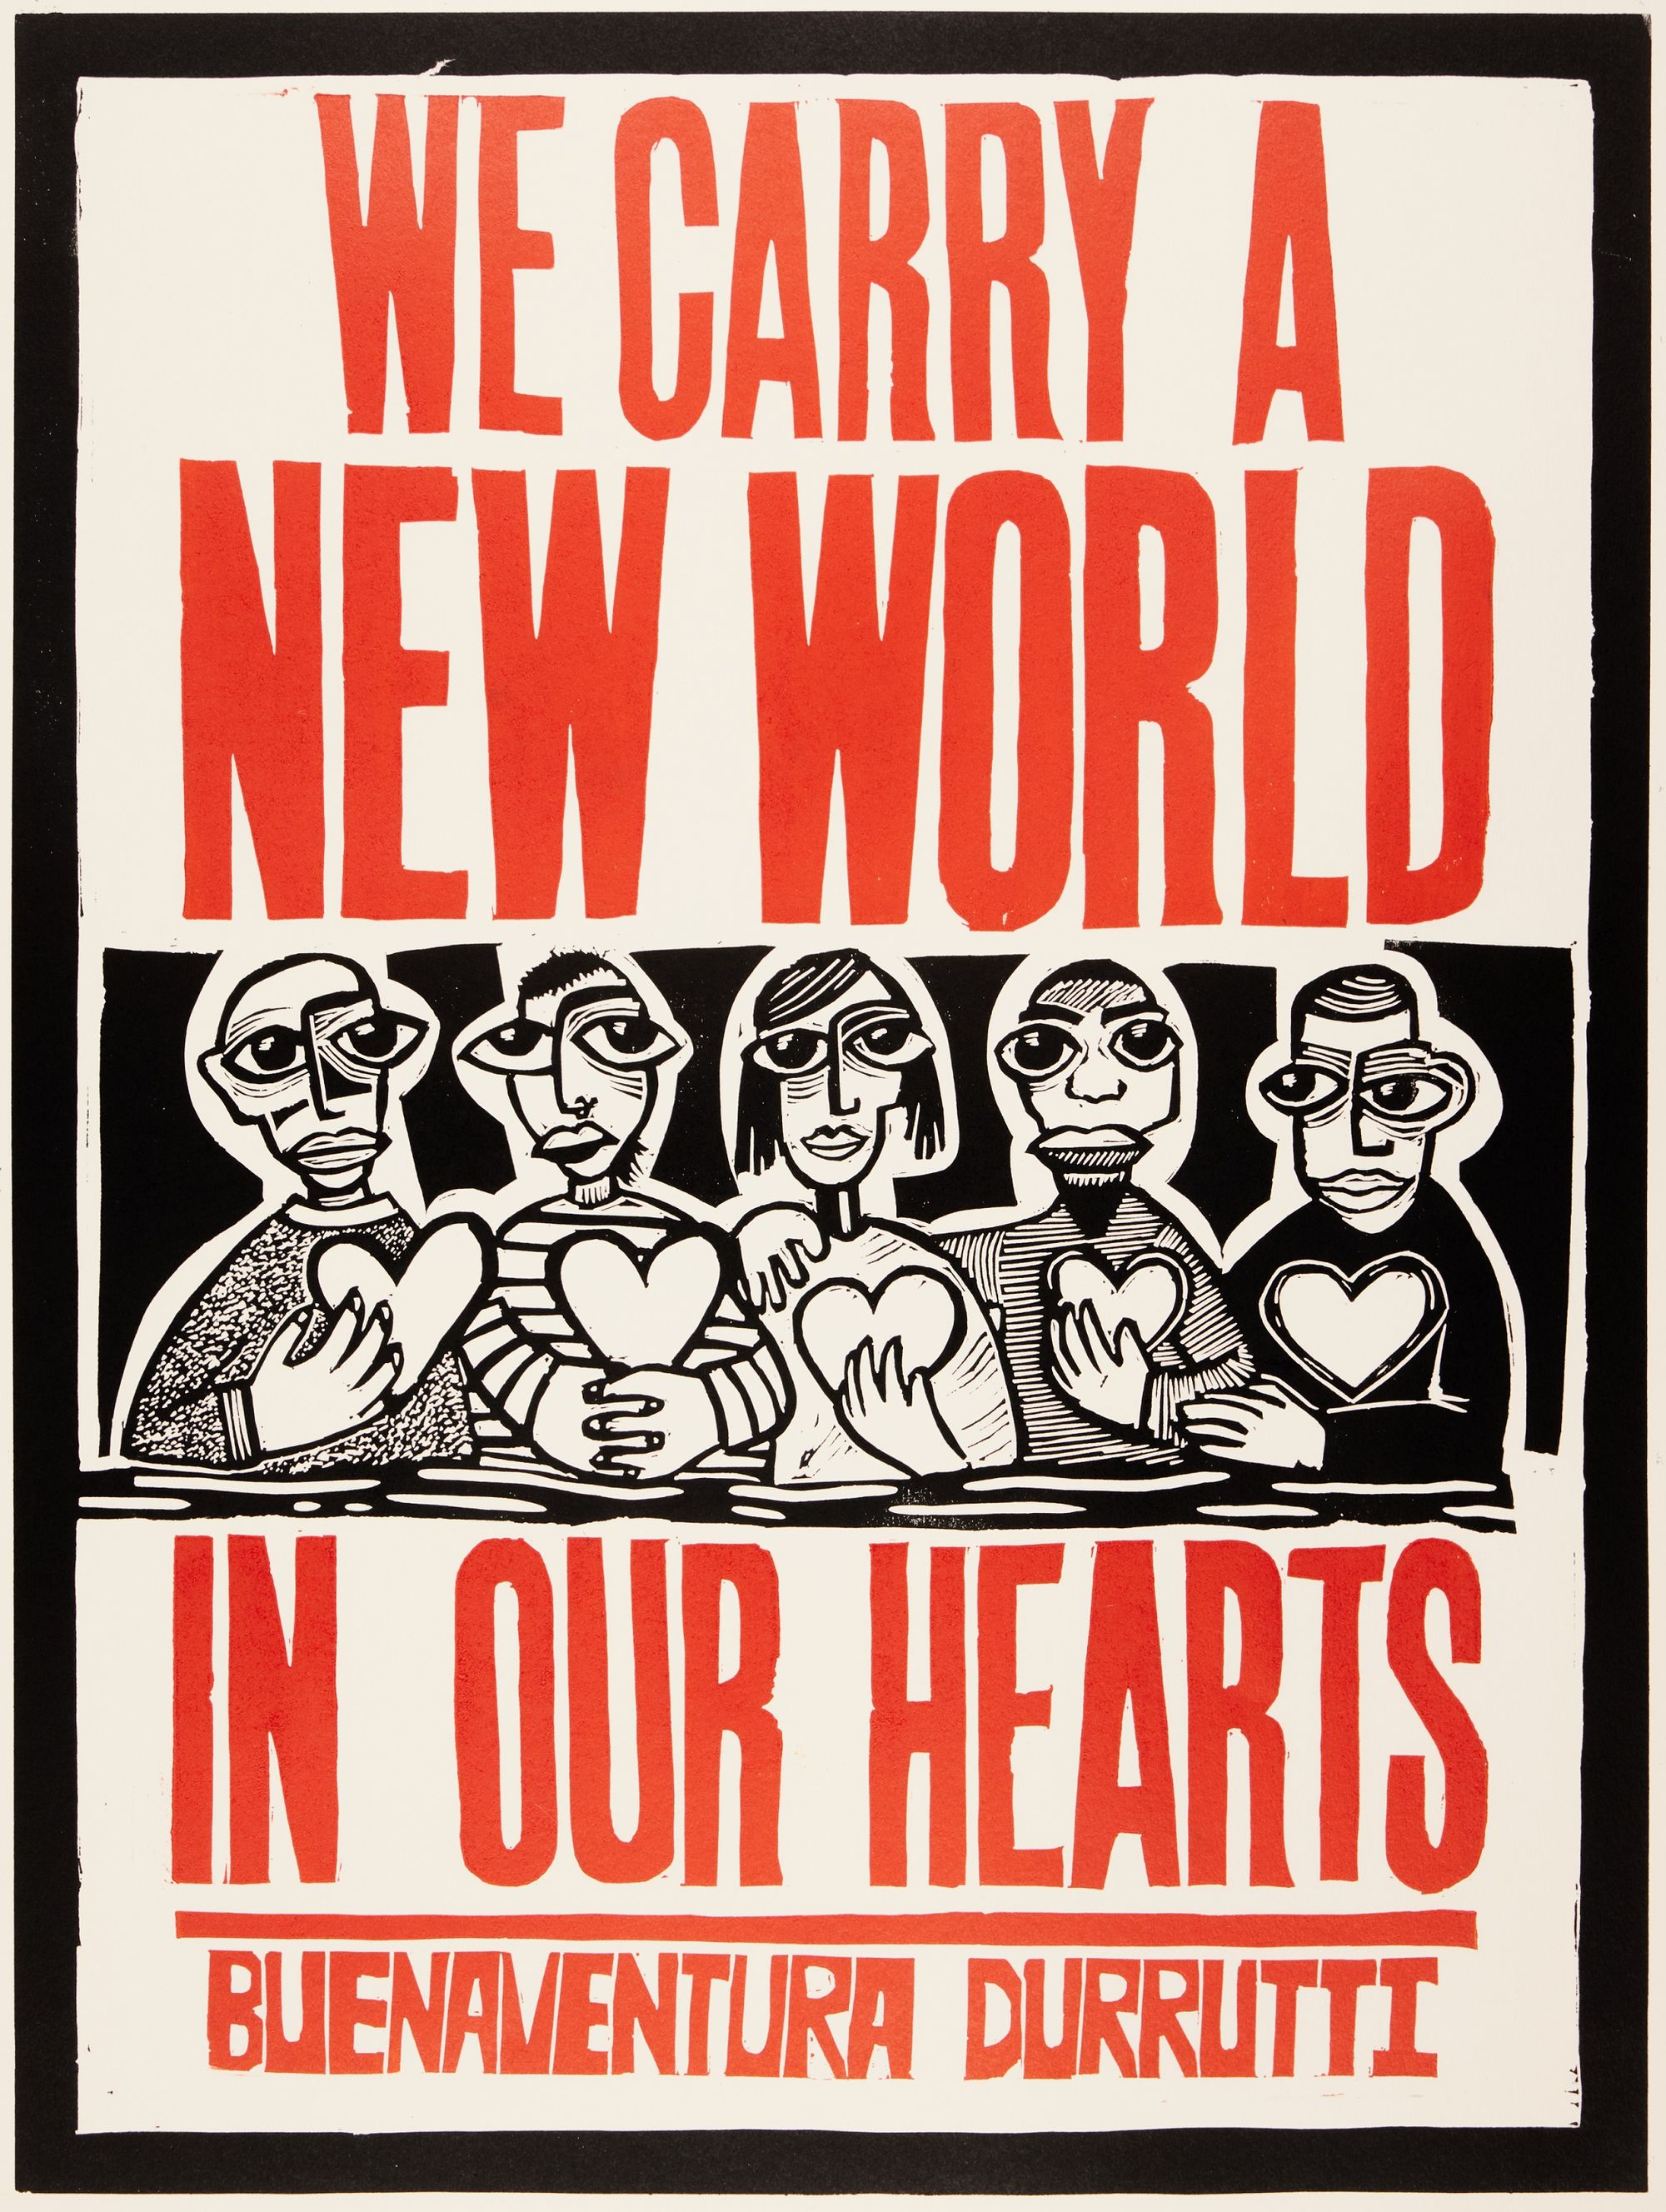 A New World in Our Hearts